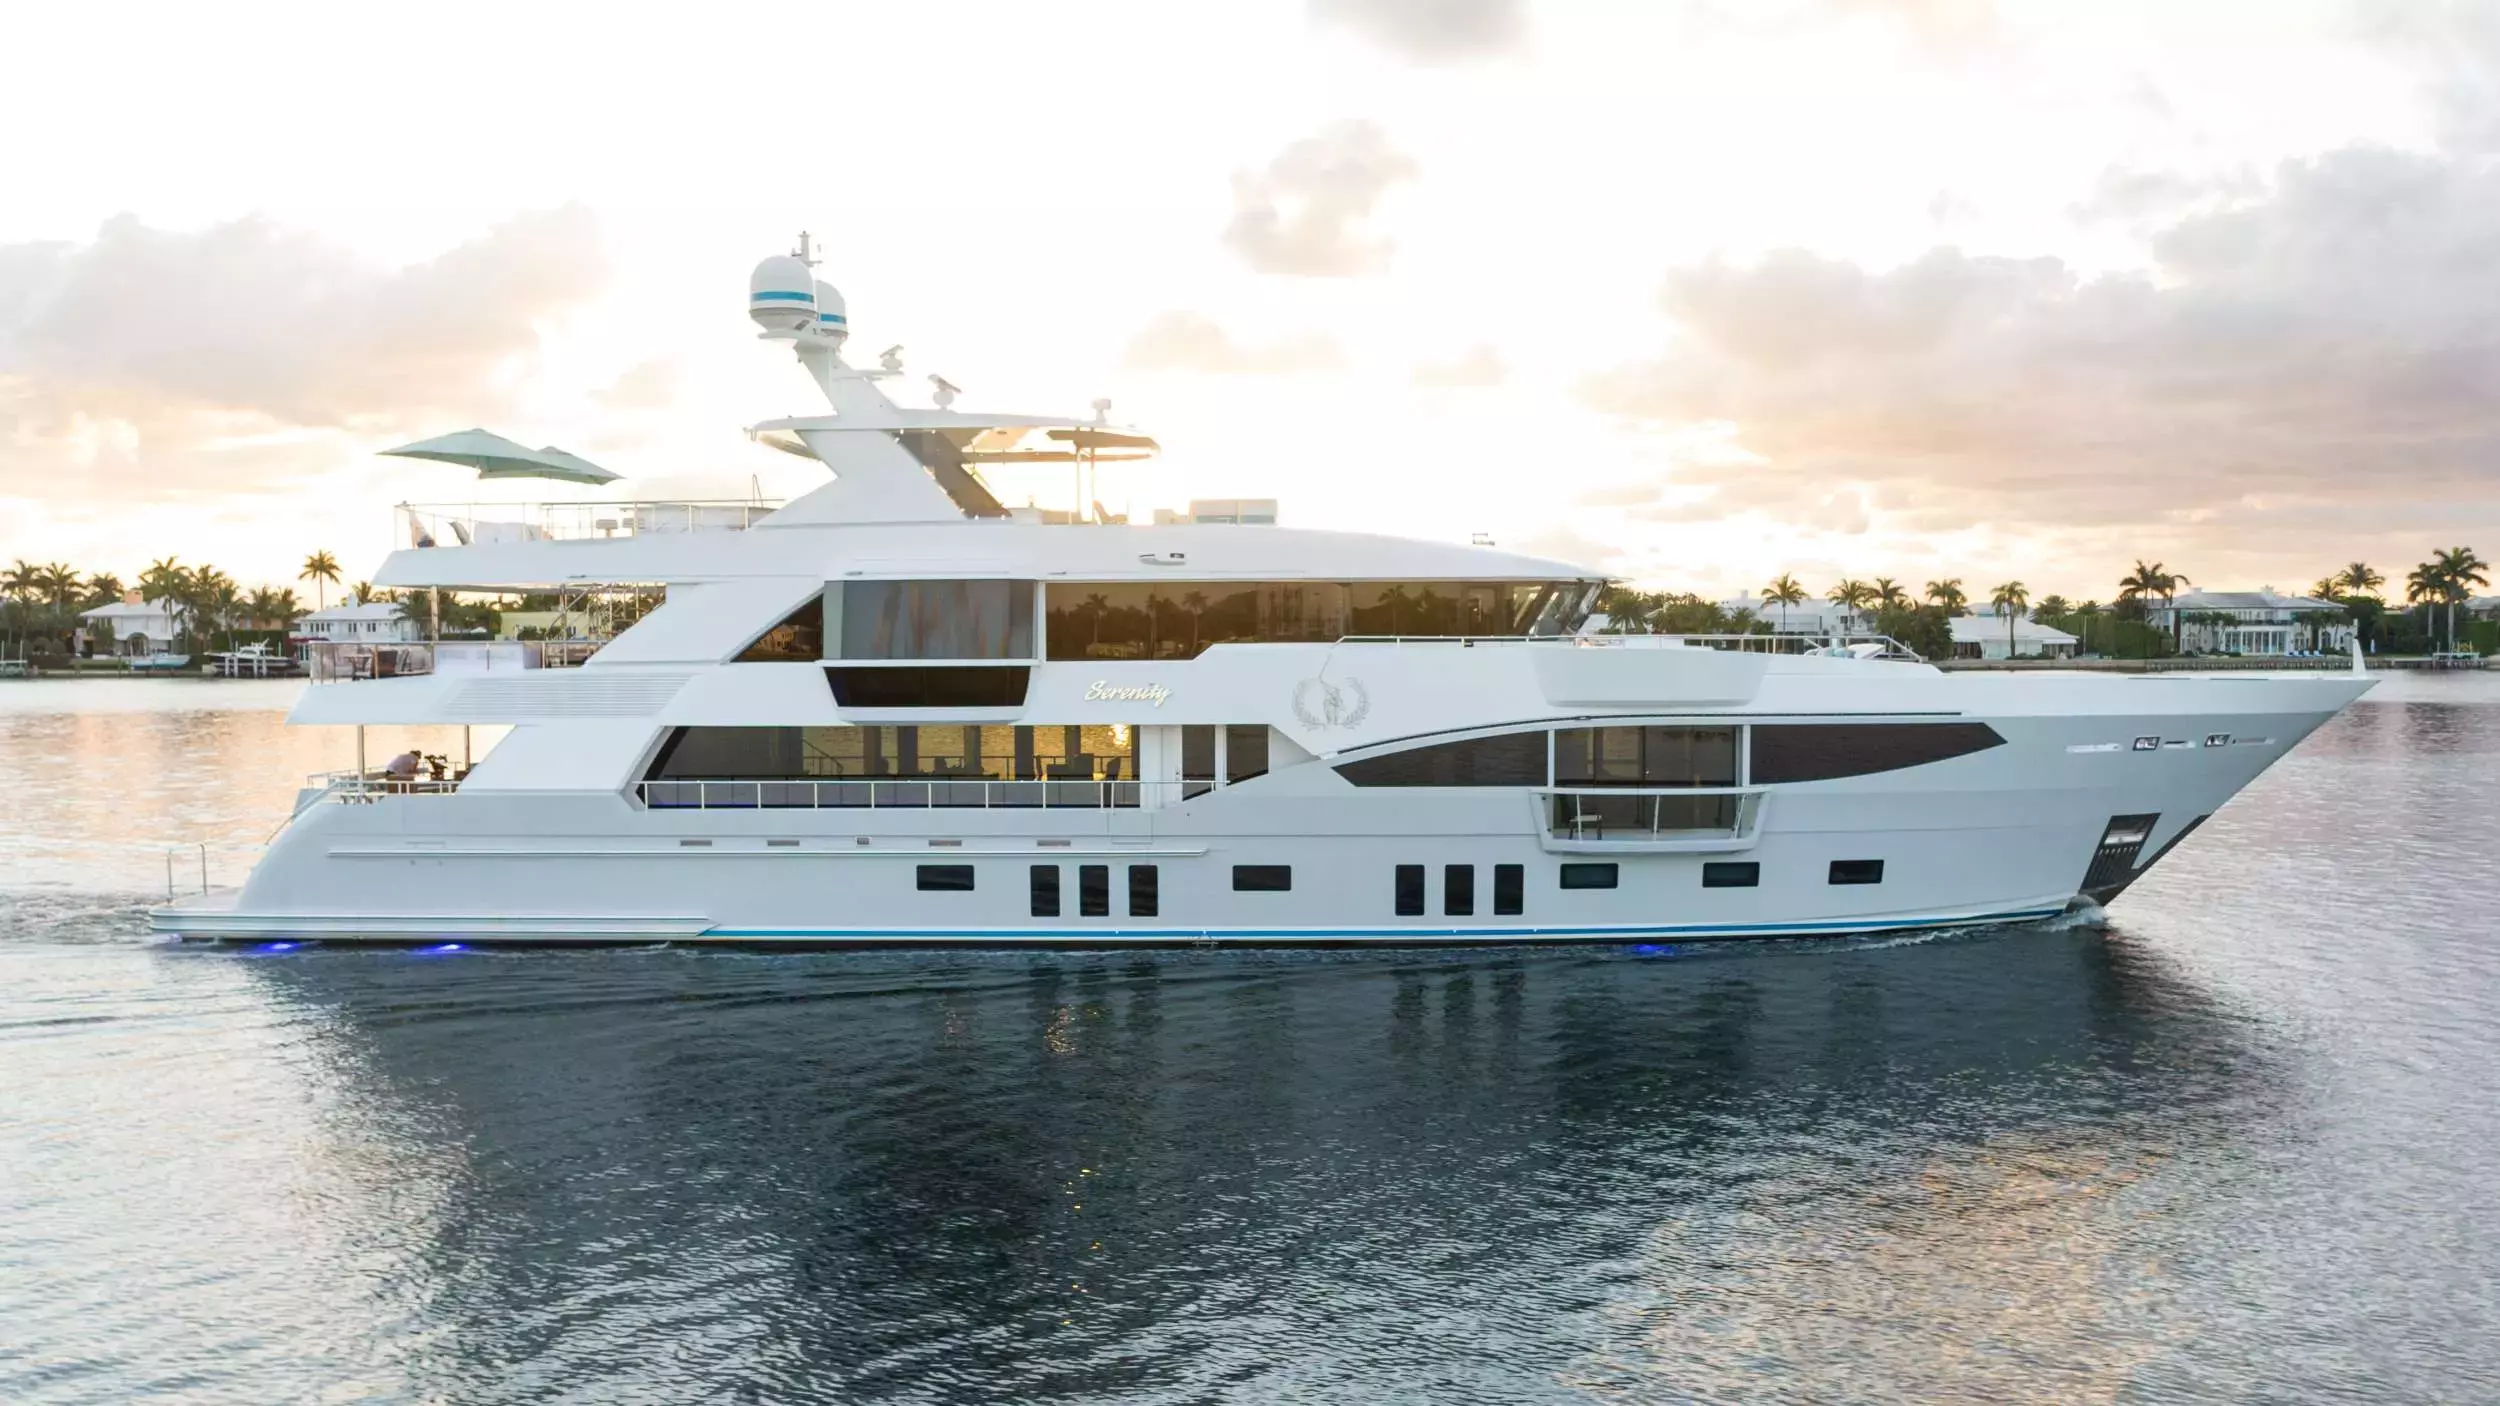 Serenity by IAG Yachts - Top rates for a Charter of a private Superyacht in Turks and Caicos